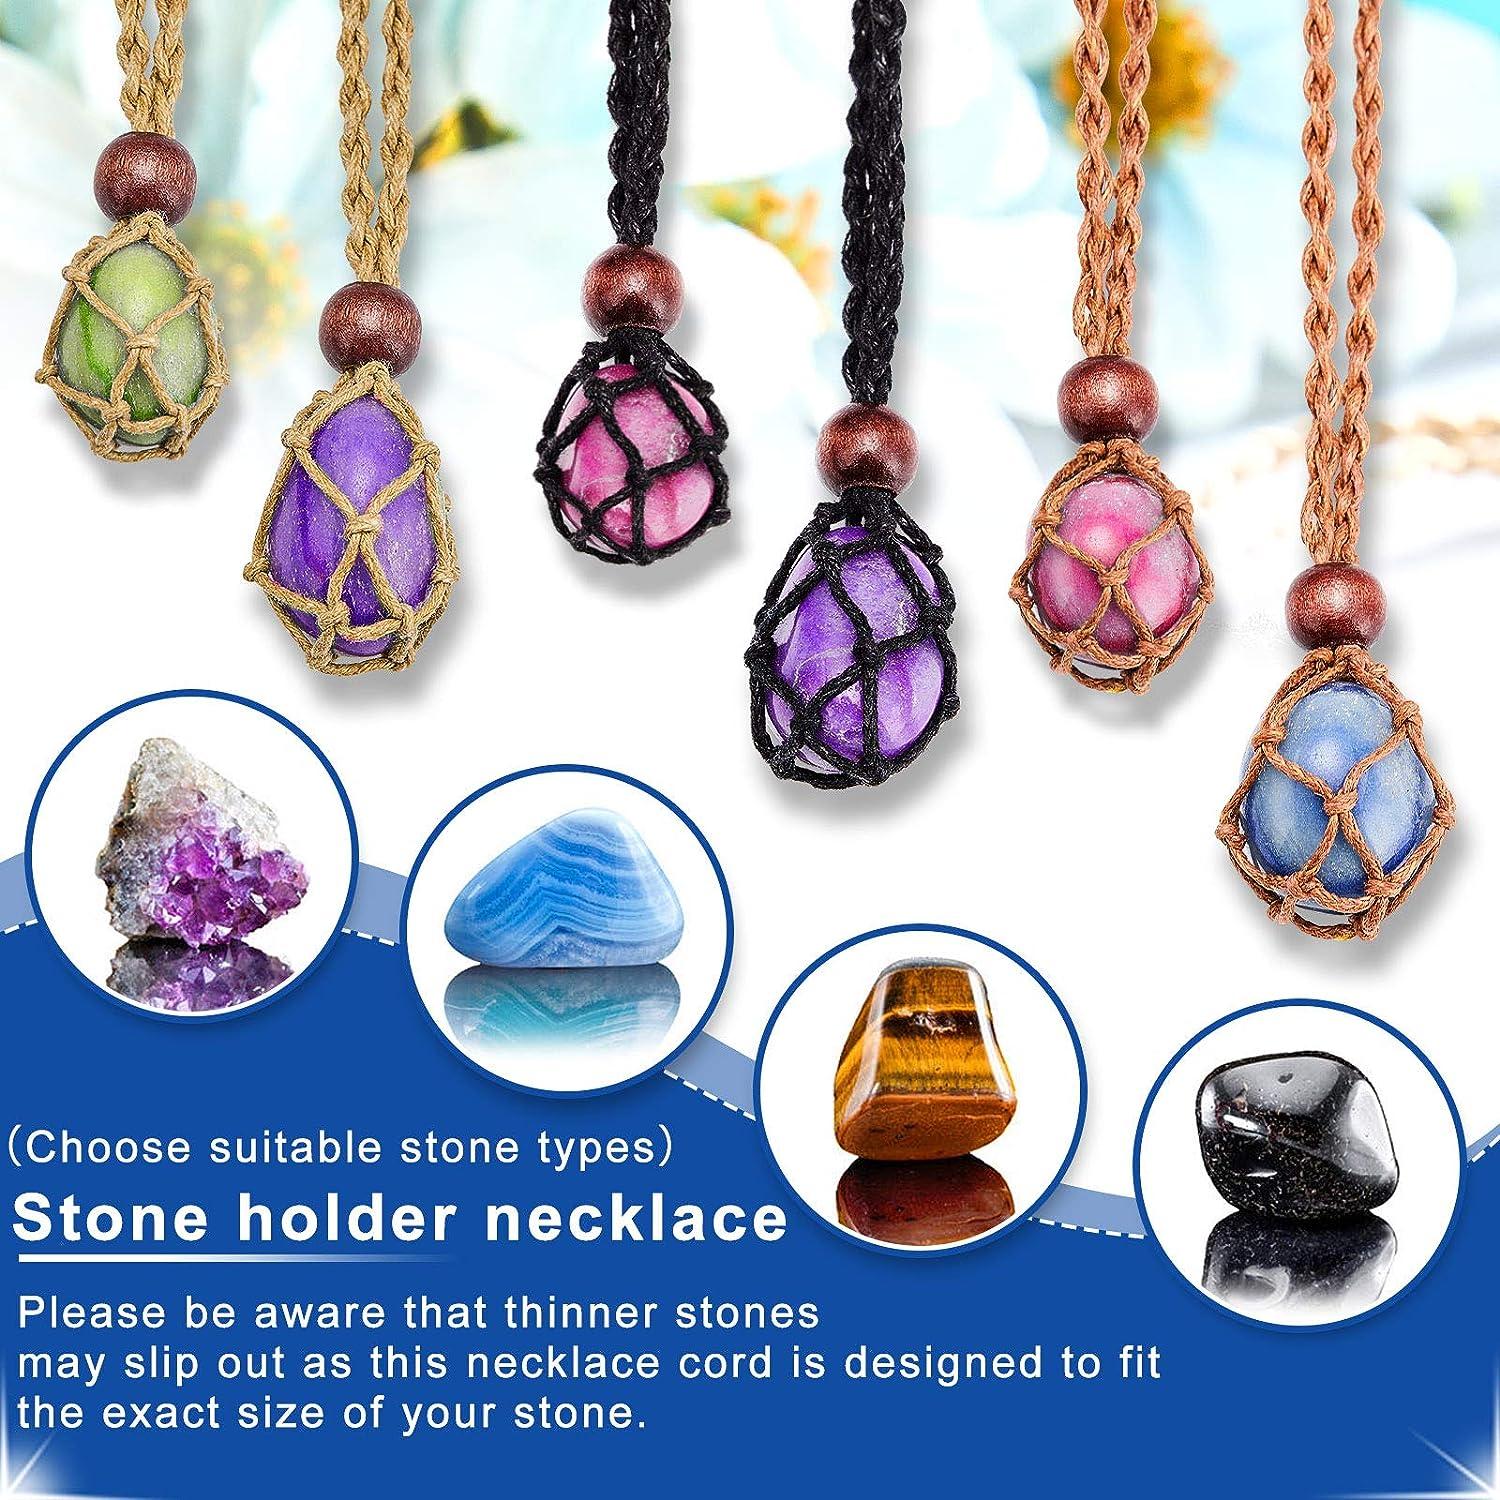 6 Pieces Necklace Cord Empty Stone Holder Stone Necklace Cord Adjustable  Necklace Holder DIY Quartz Crystal Necklace Cord Jewelry Making Supplies